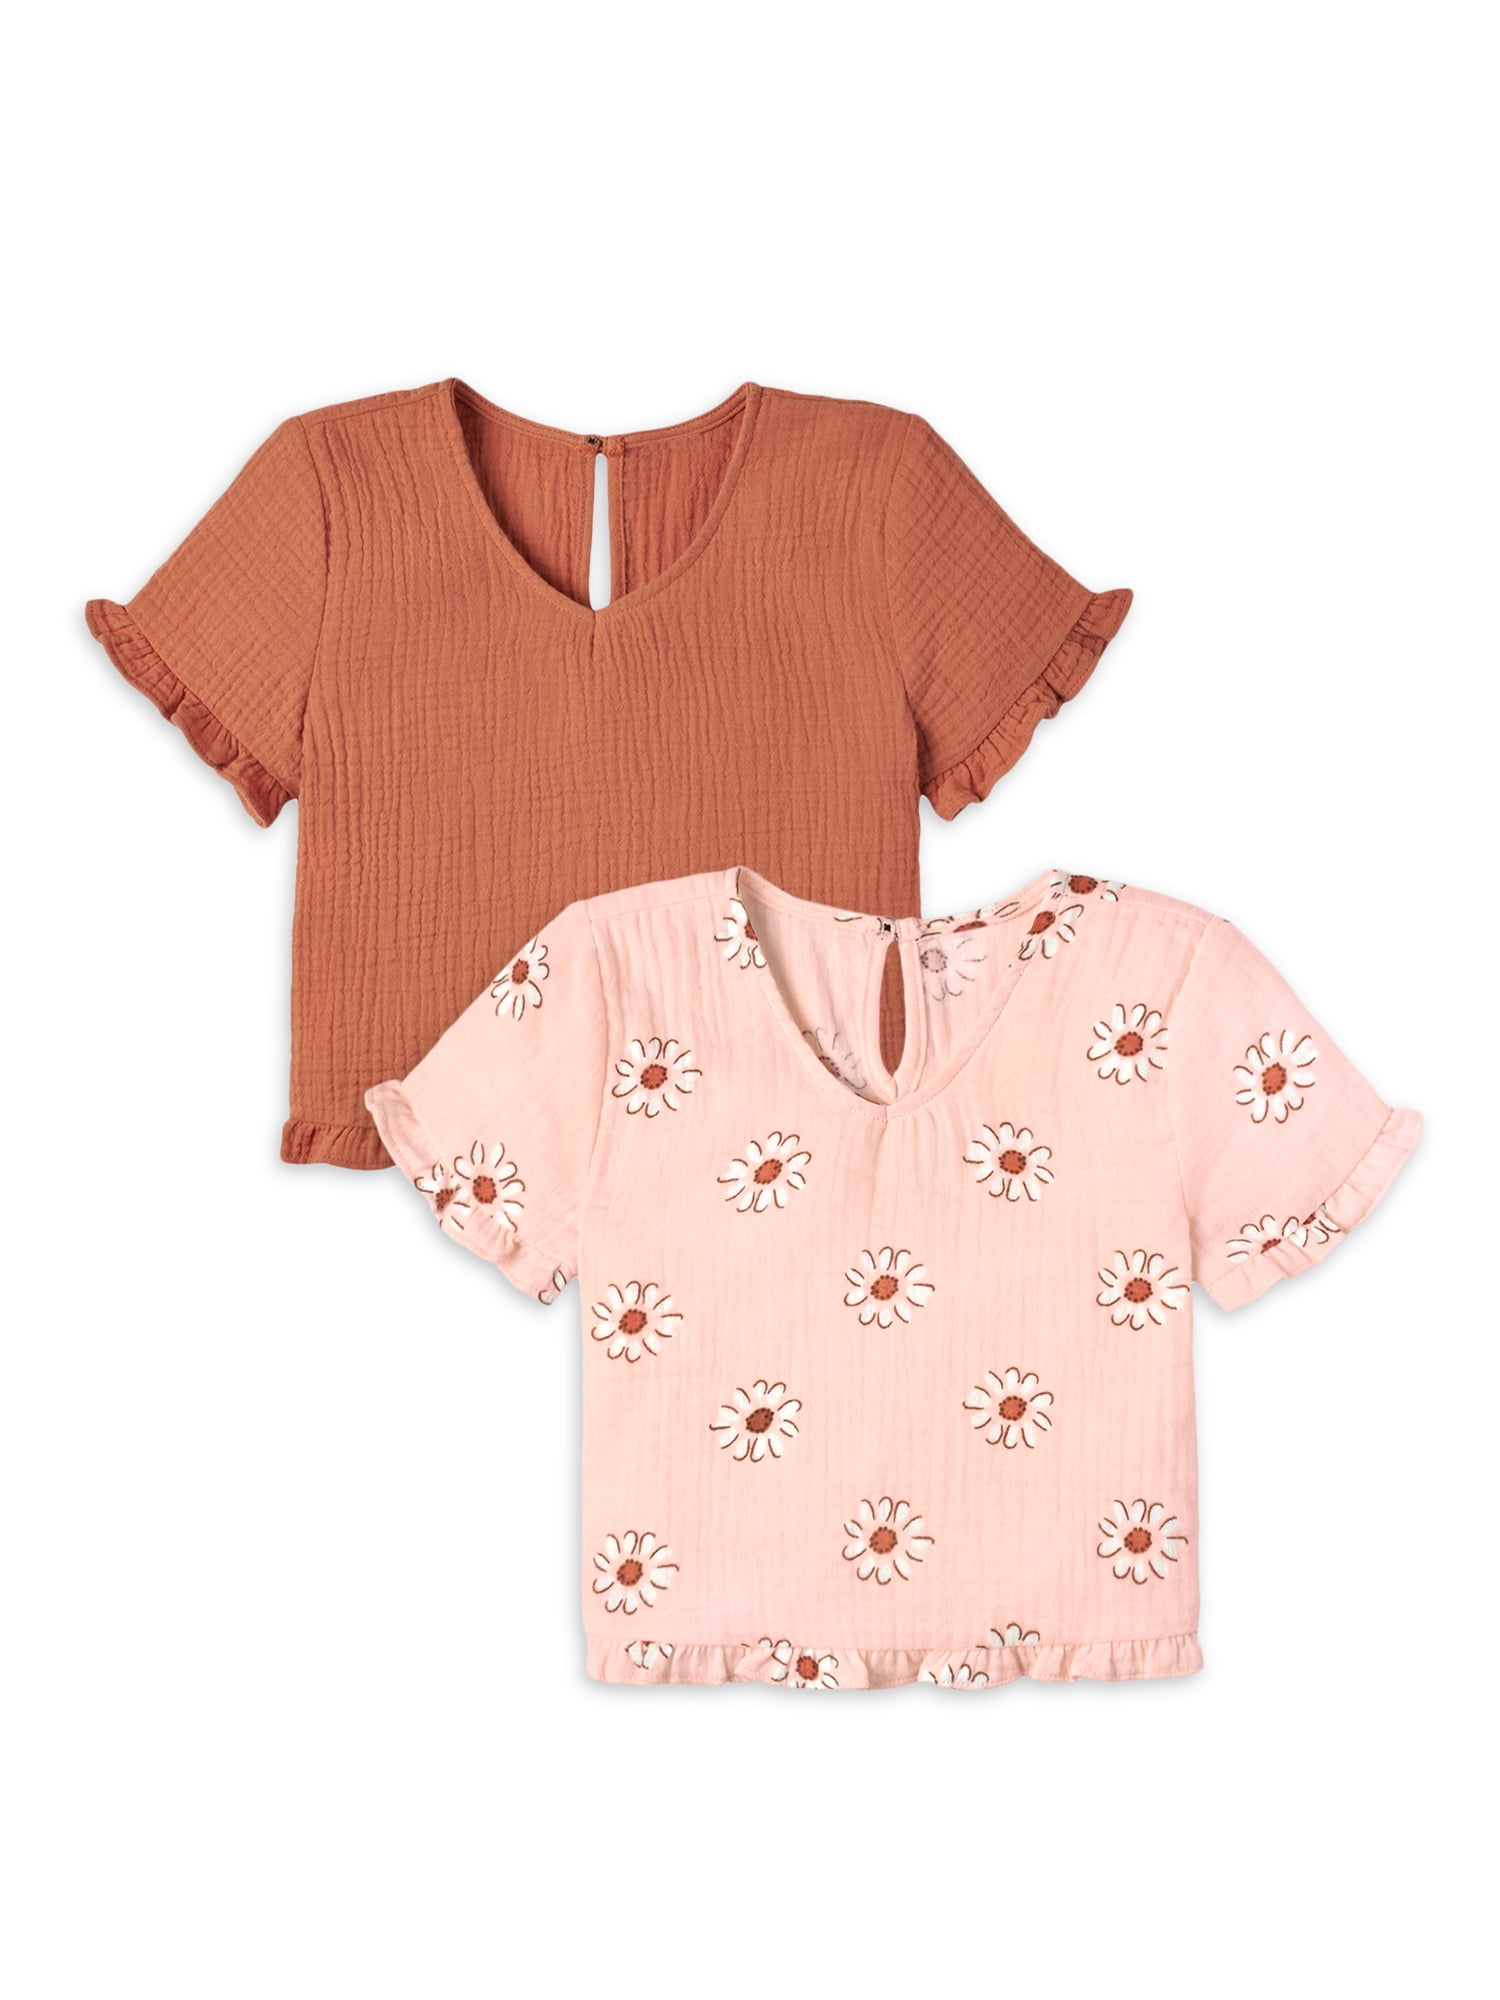 Modern Moments by Gerber Toddler Girl Ruffled Gauze Top, 2-Pack, Sizes 12M-5T